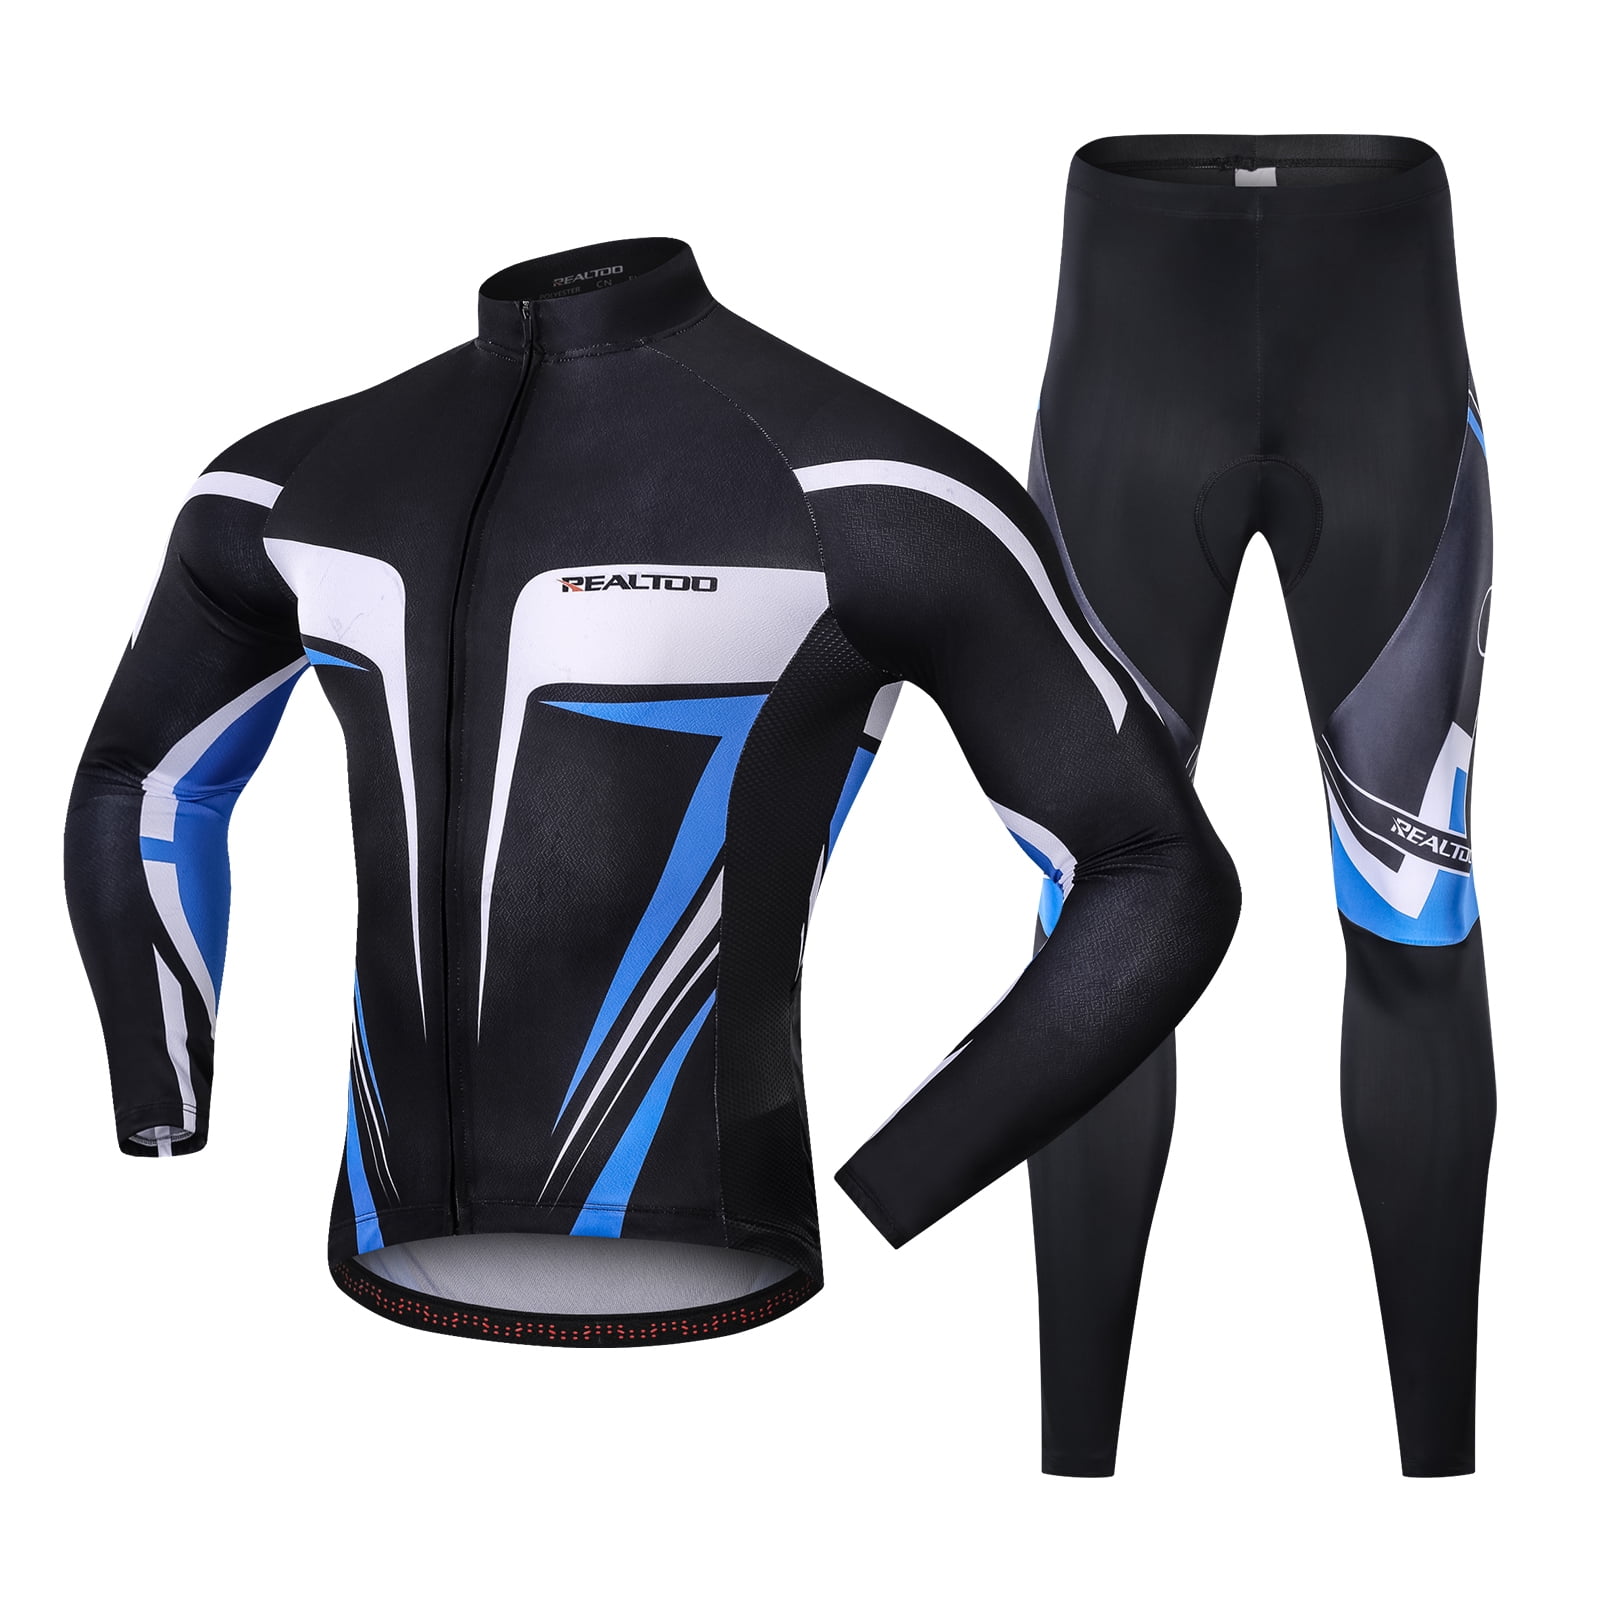 Winter Cycling Suit Jersey Long Sleeves Bike Breathable Set Clothing Jacket Full Zipper 9D Gel Padded Bib Pants Set for Race MTB Bicycle